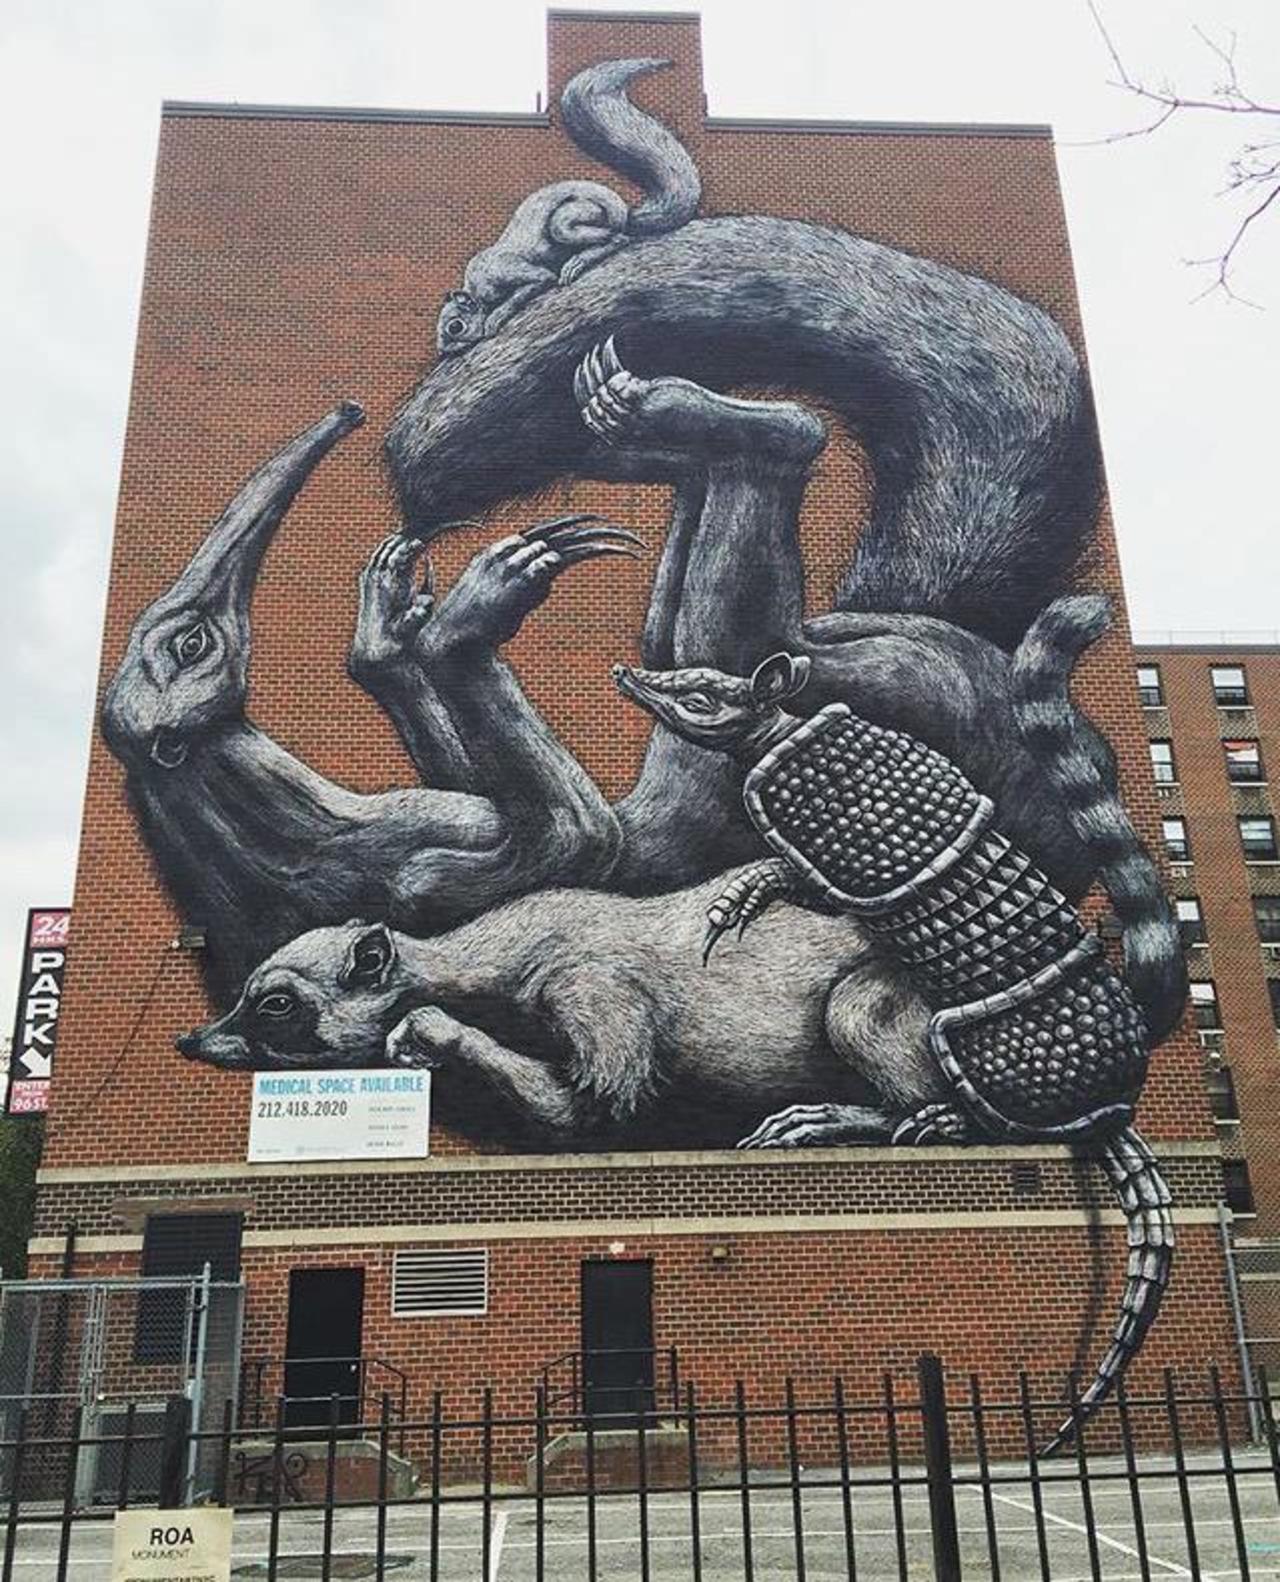 The completed new large scale Street Art wall by ROA in NYC

#art #graffiti #mural #streetart http://t.co/tS1ISuNEMO